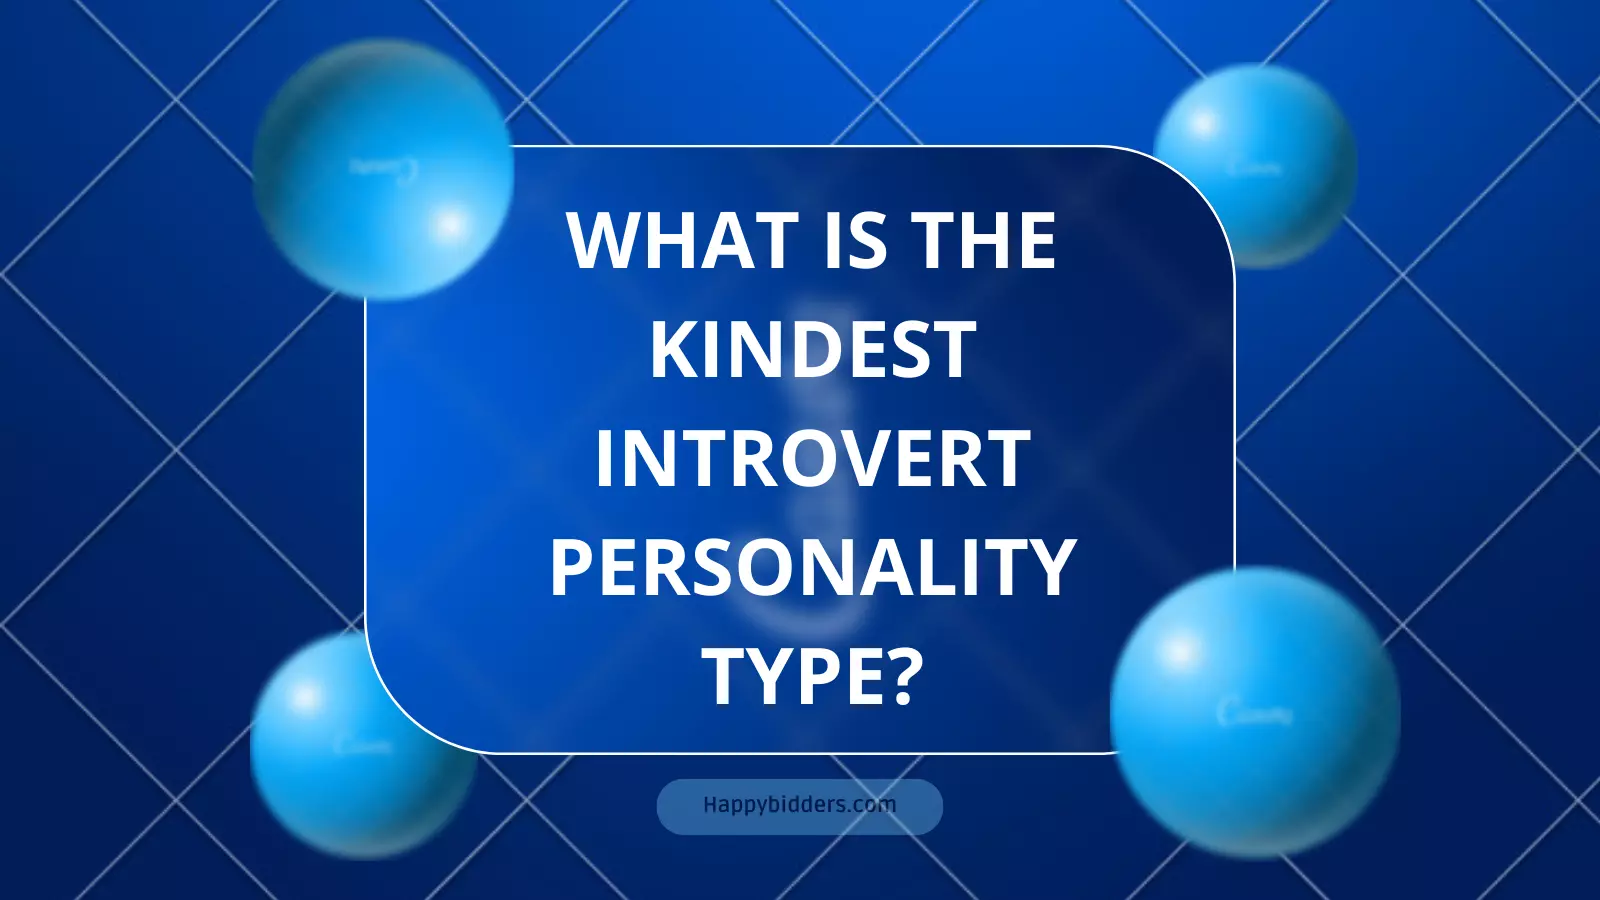 What is the Kindest Introvert Personality Type?